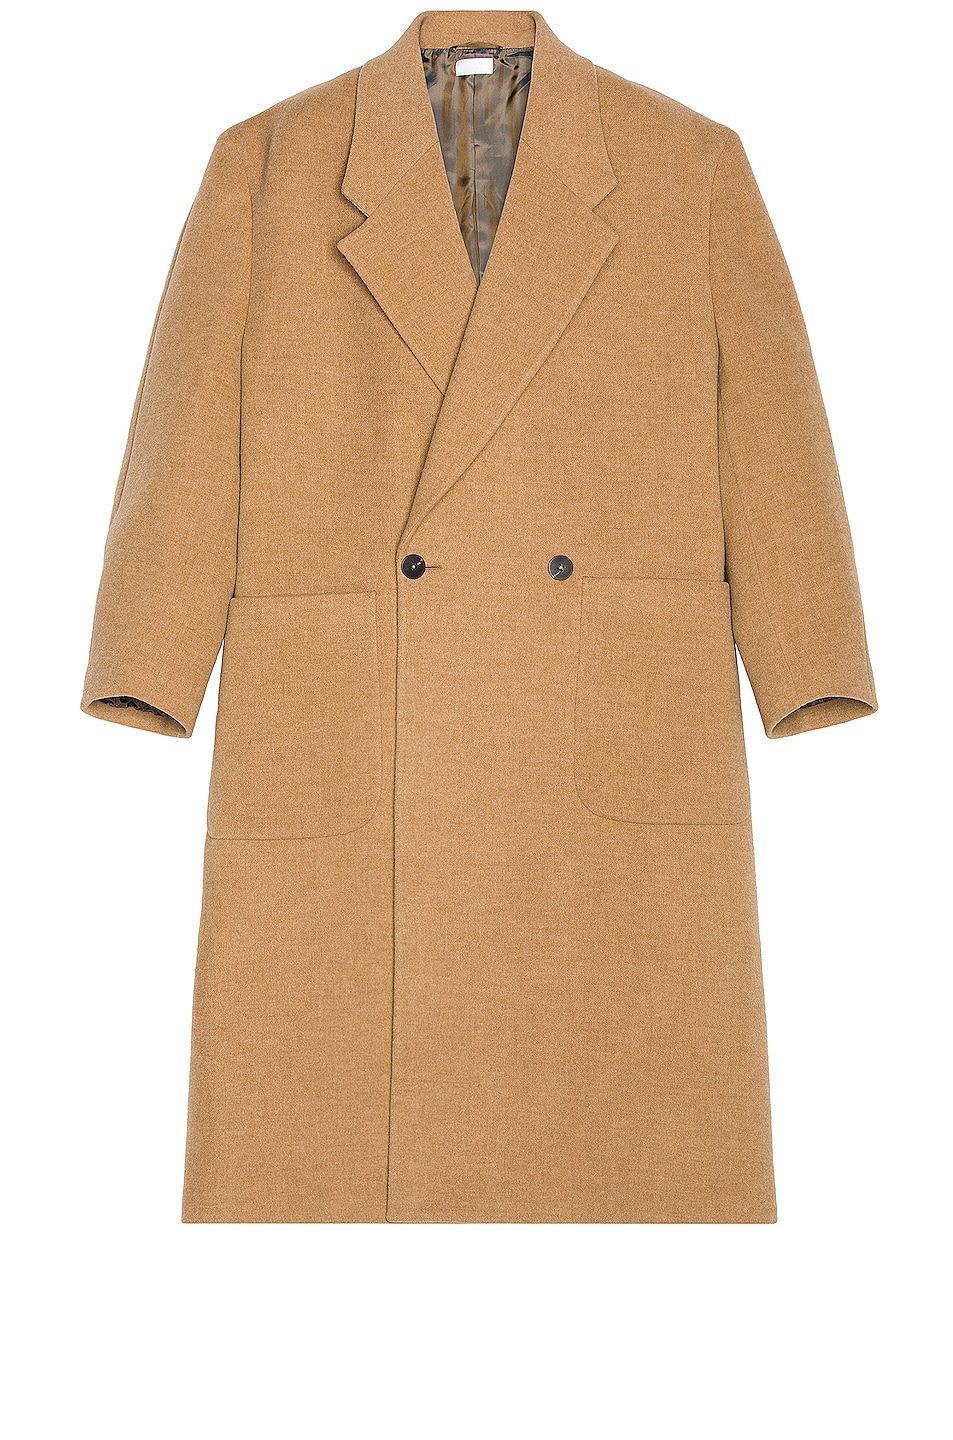 Image 1 of Fear of God Exclusively for Ermenegildo Zegna Double Breasted Coat in Sand